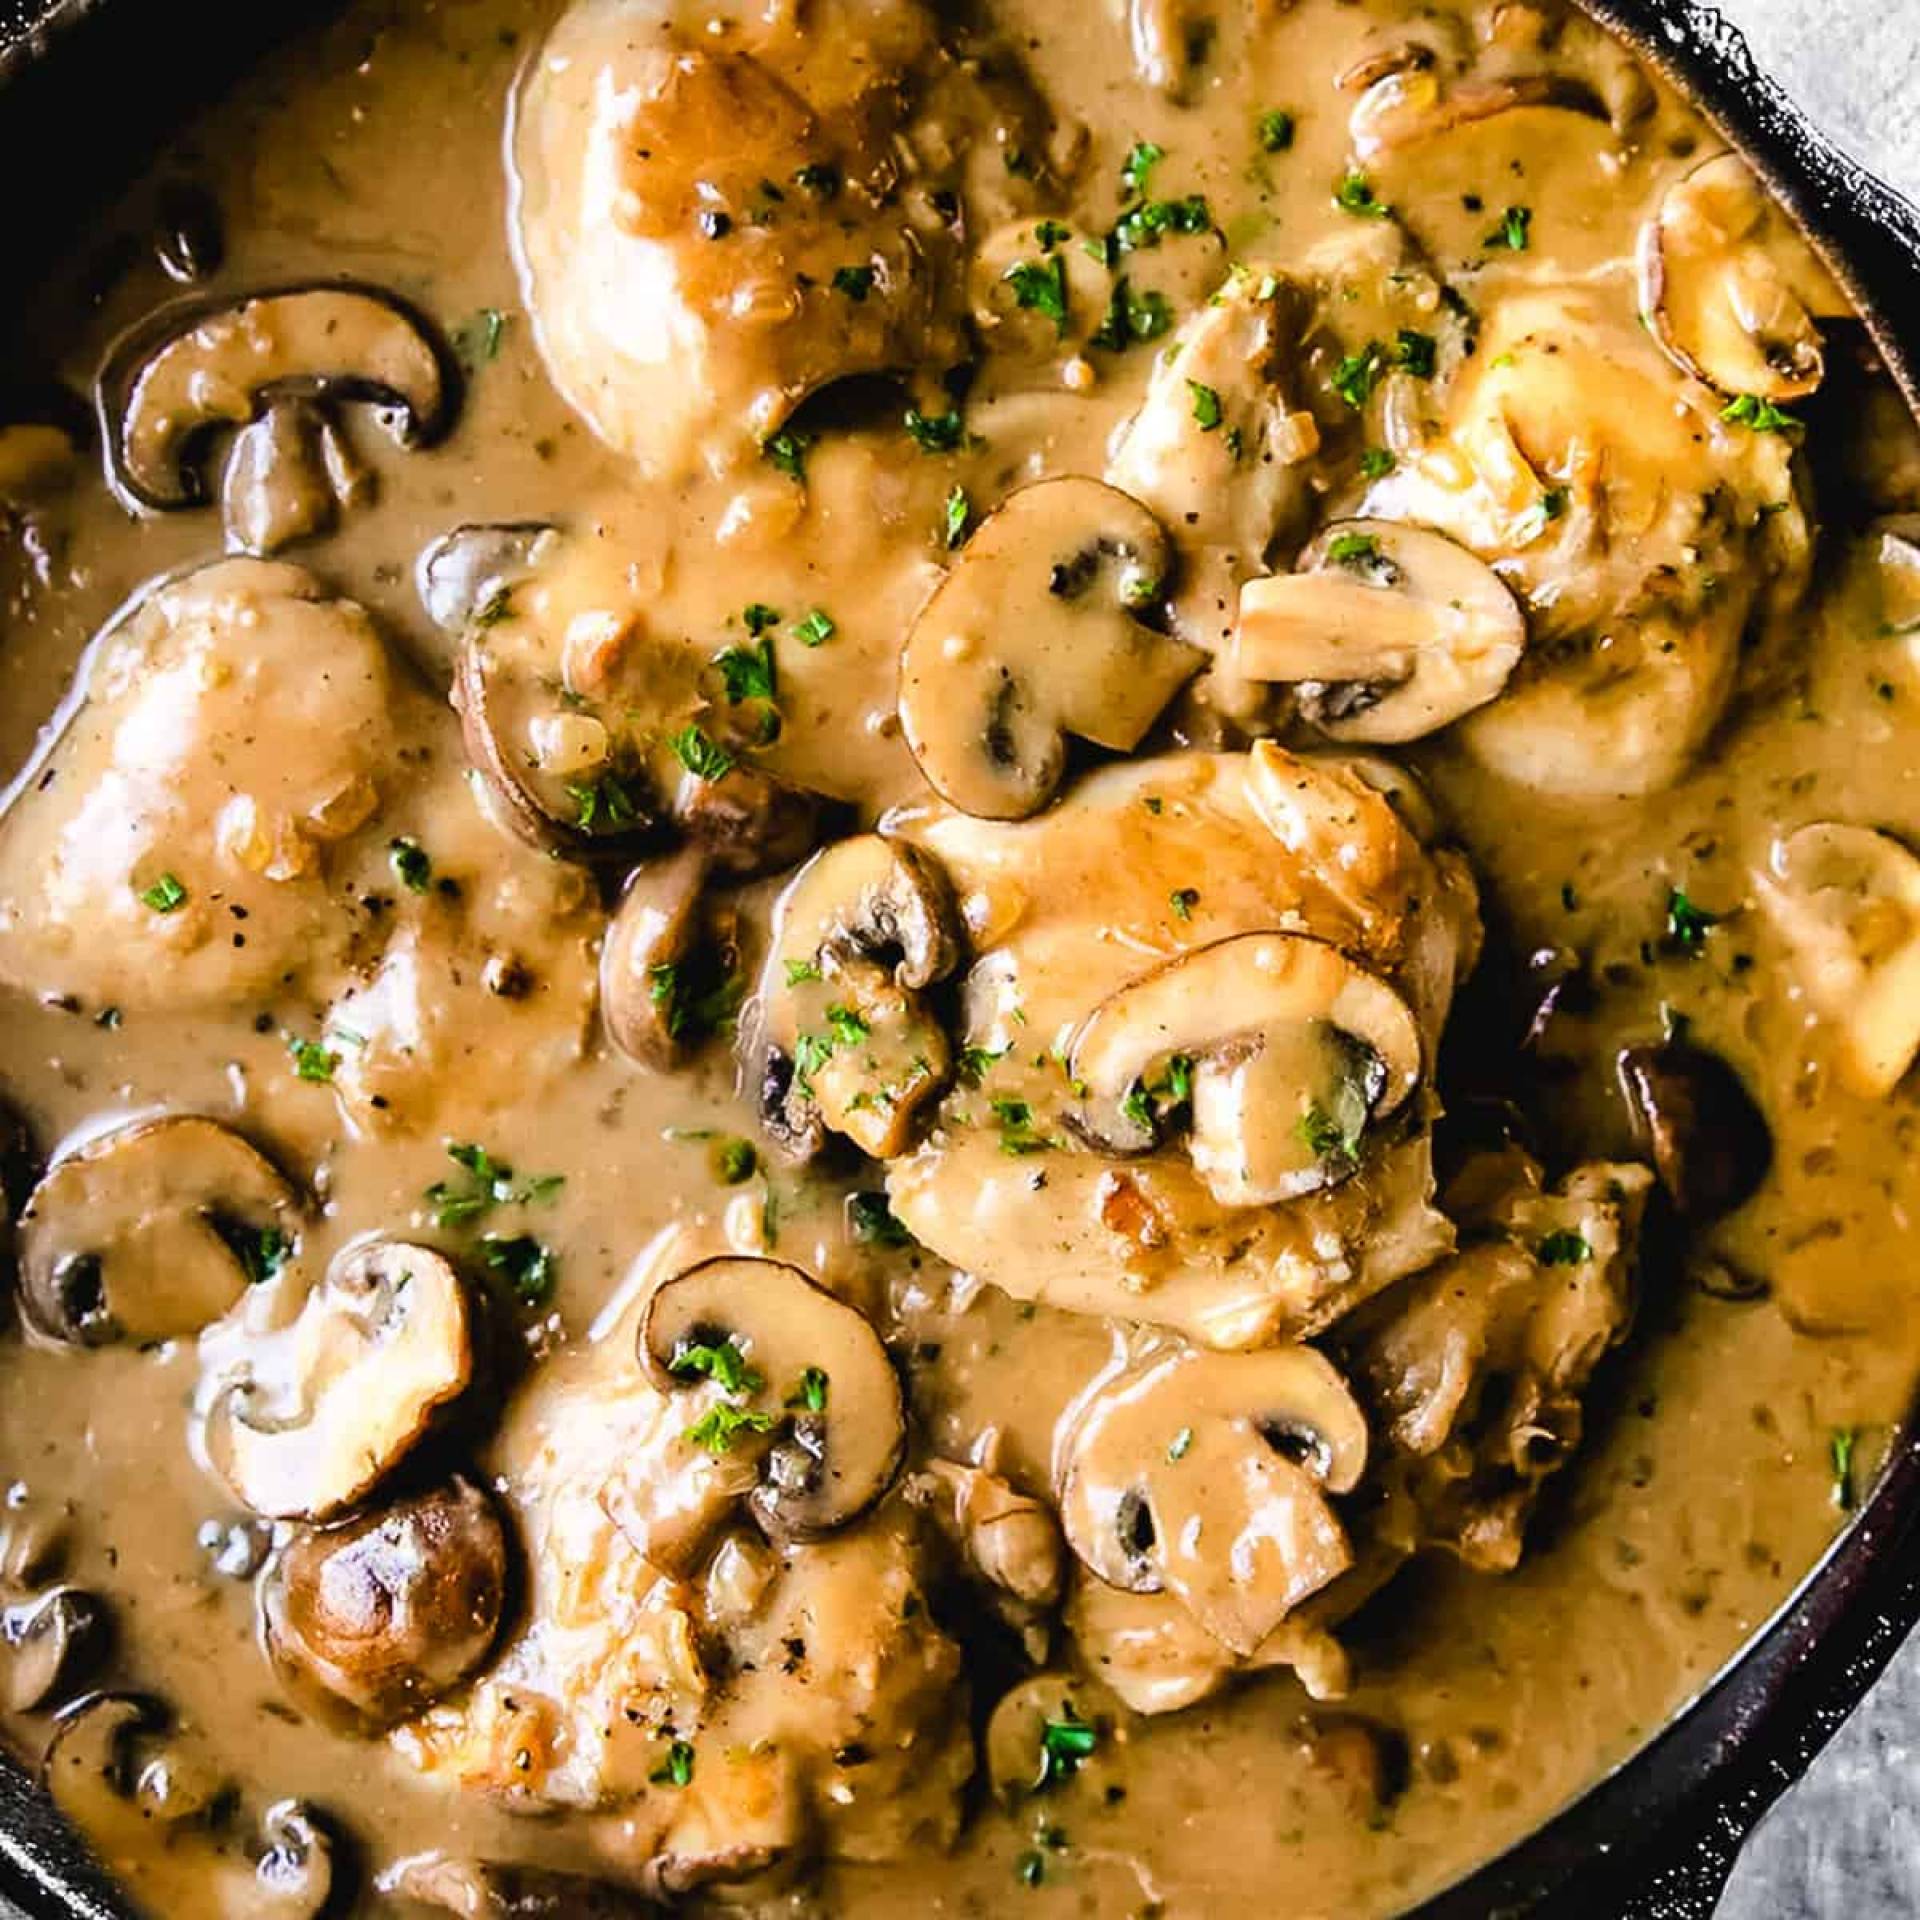 Chicken and Mushroom Stroganoff over Mashed Potatoes with Grilled Asparagus.